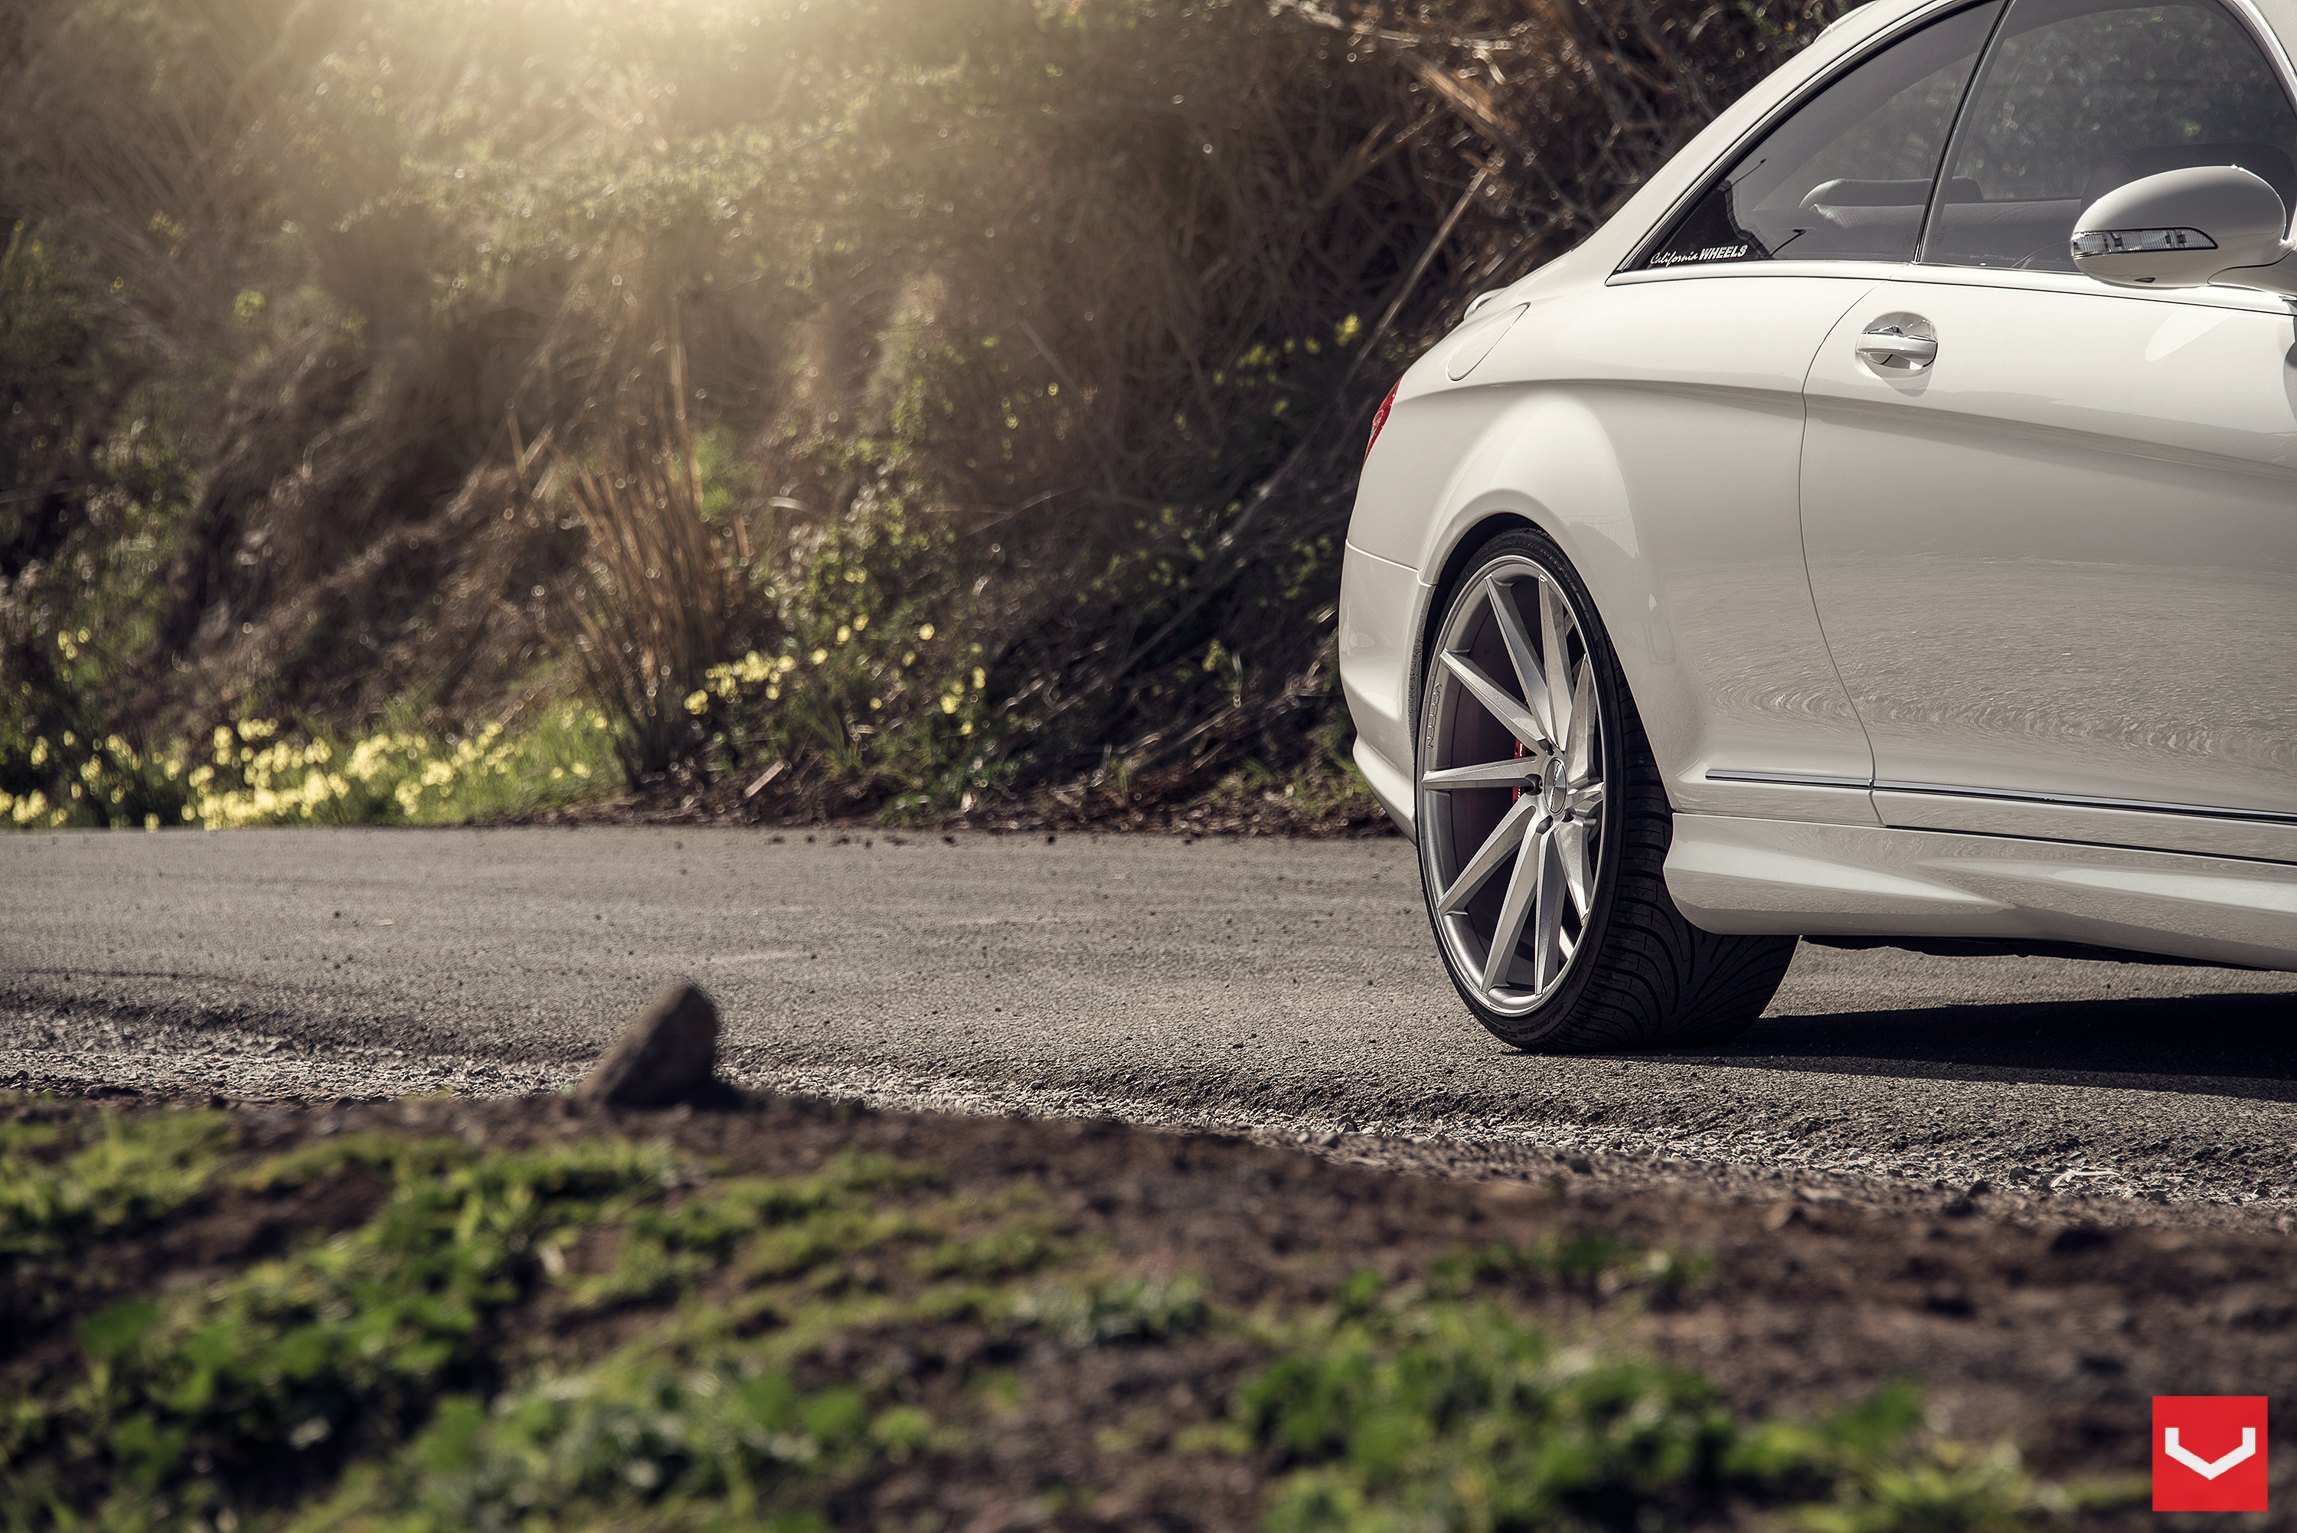 Aftermarket Side Skirts on White Mercedes CL Class - Photo by Vossen